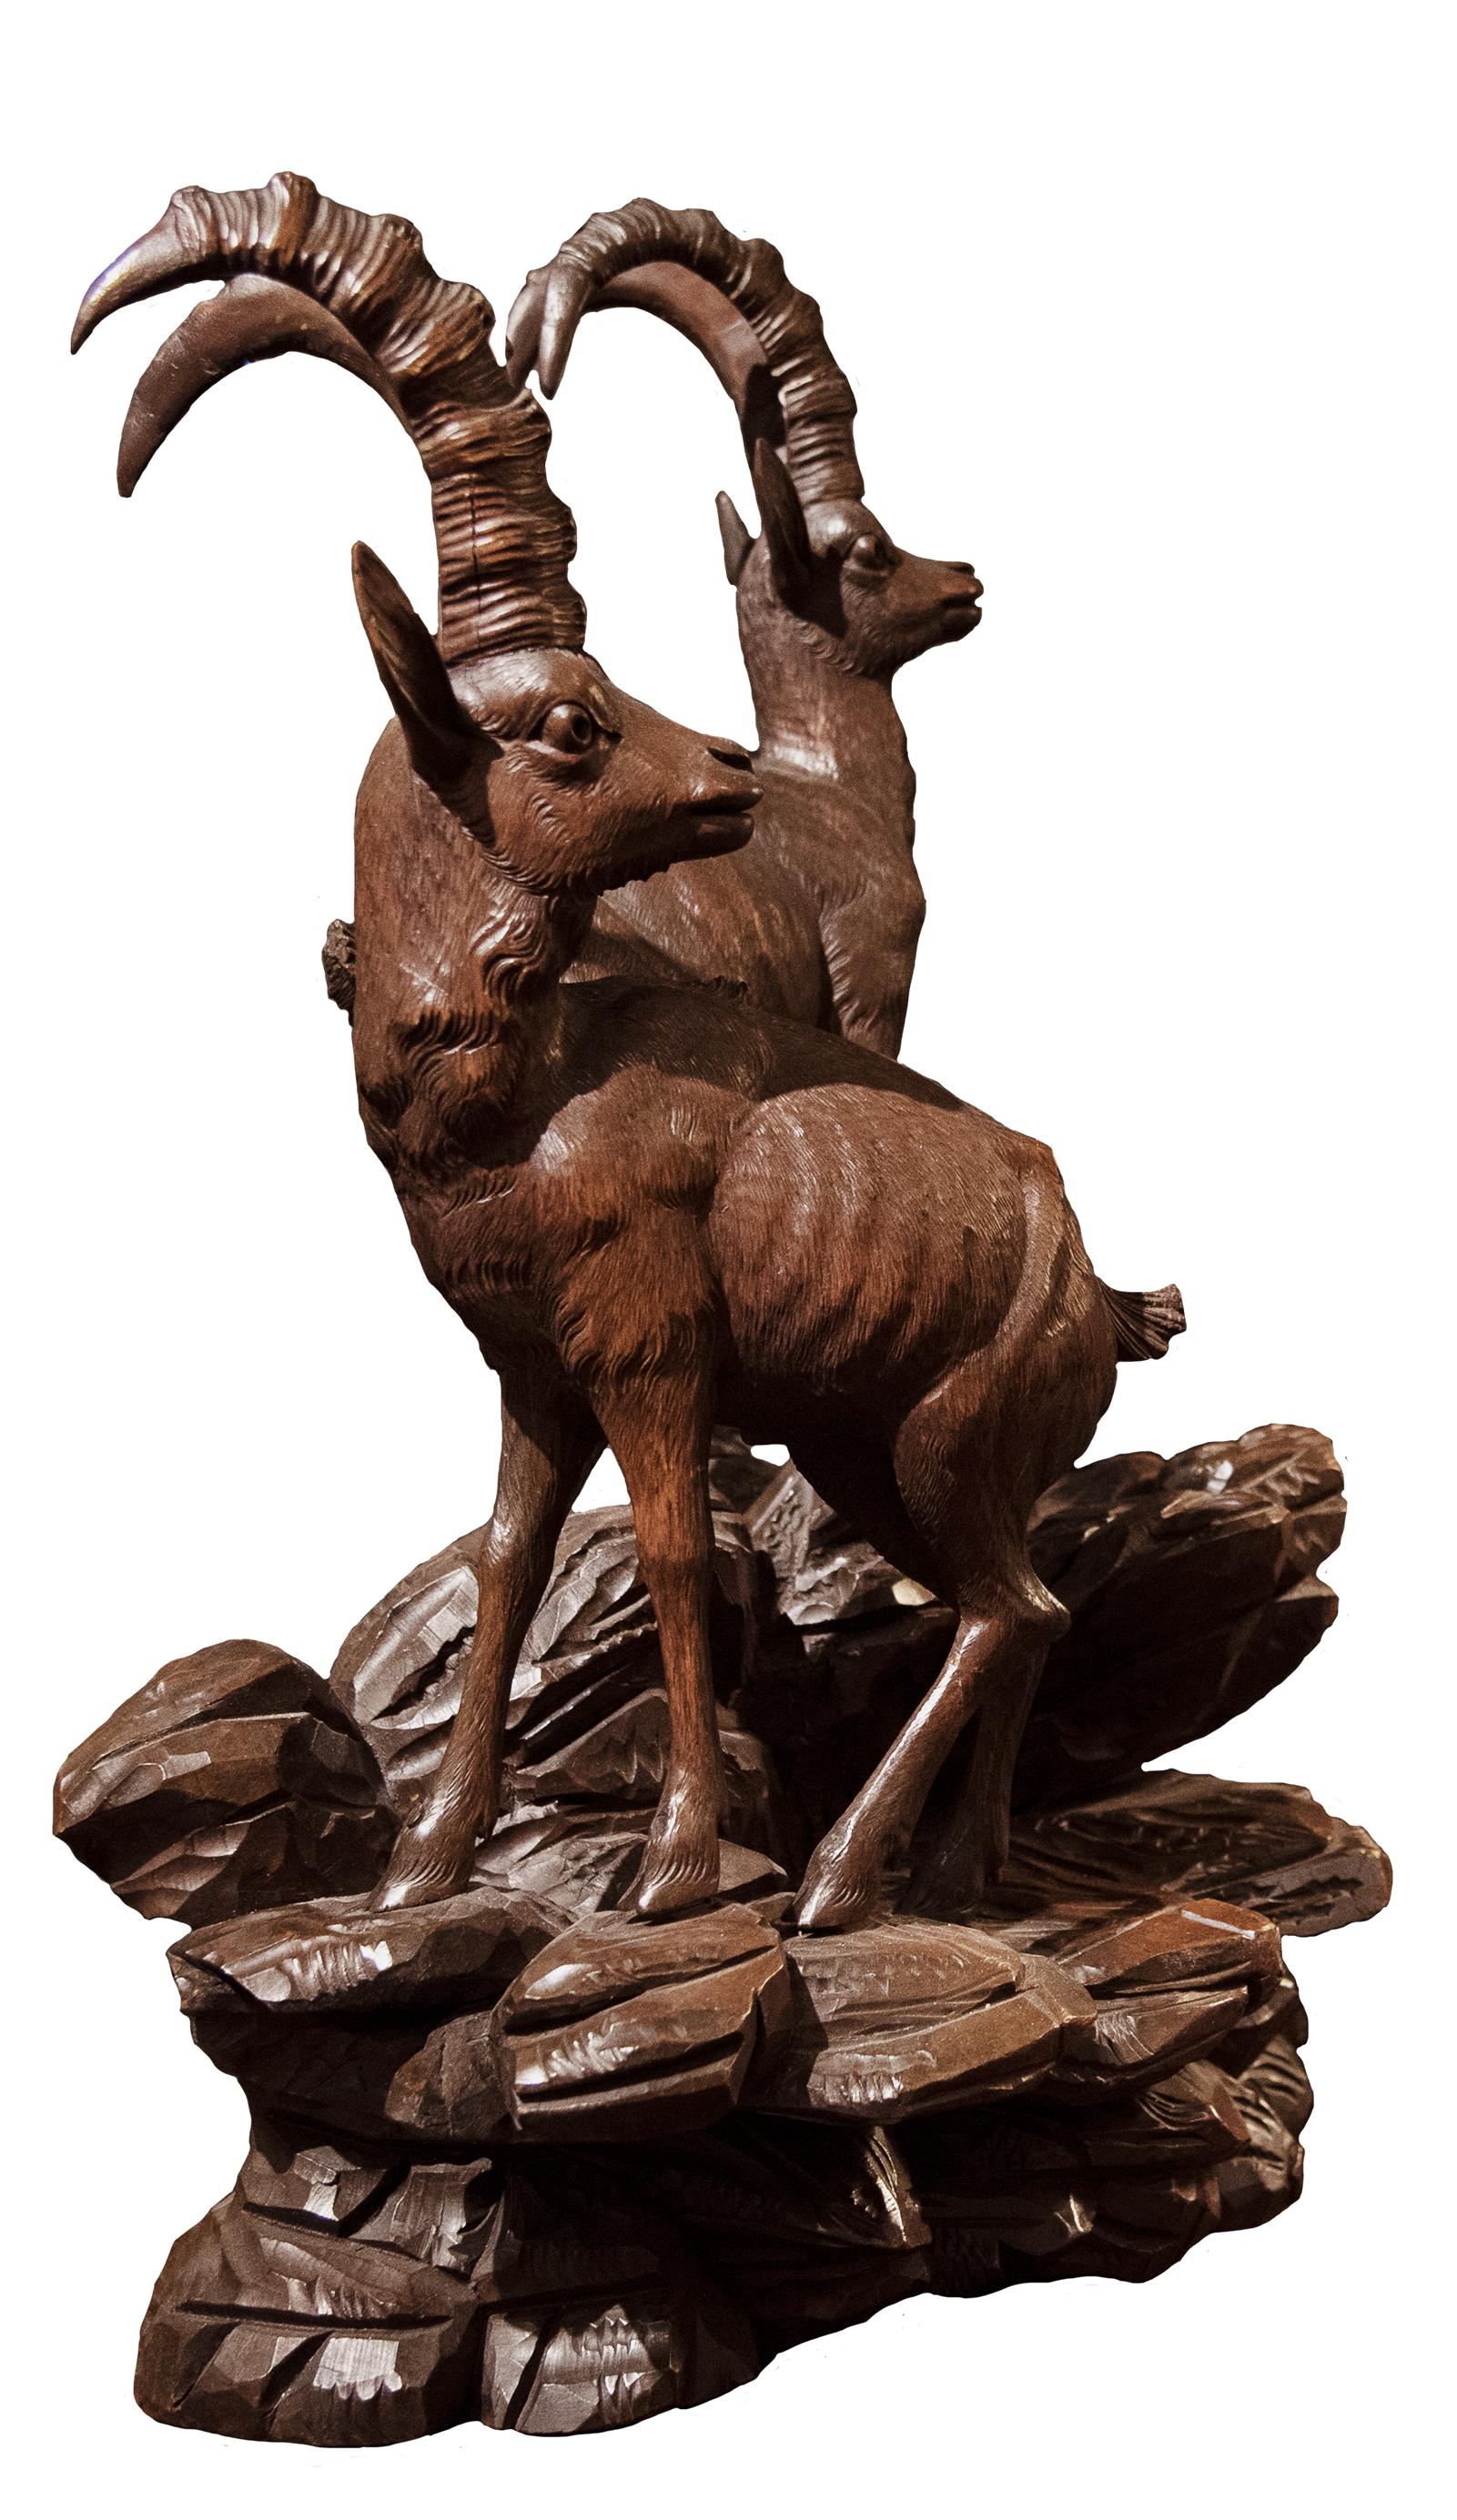 A 19th century Swiss wood sculpture of two ibexes.

Carved in the Black Forest style, popular in the late 19th century.